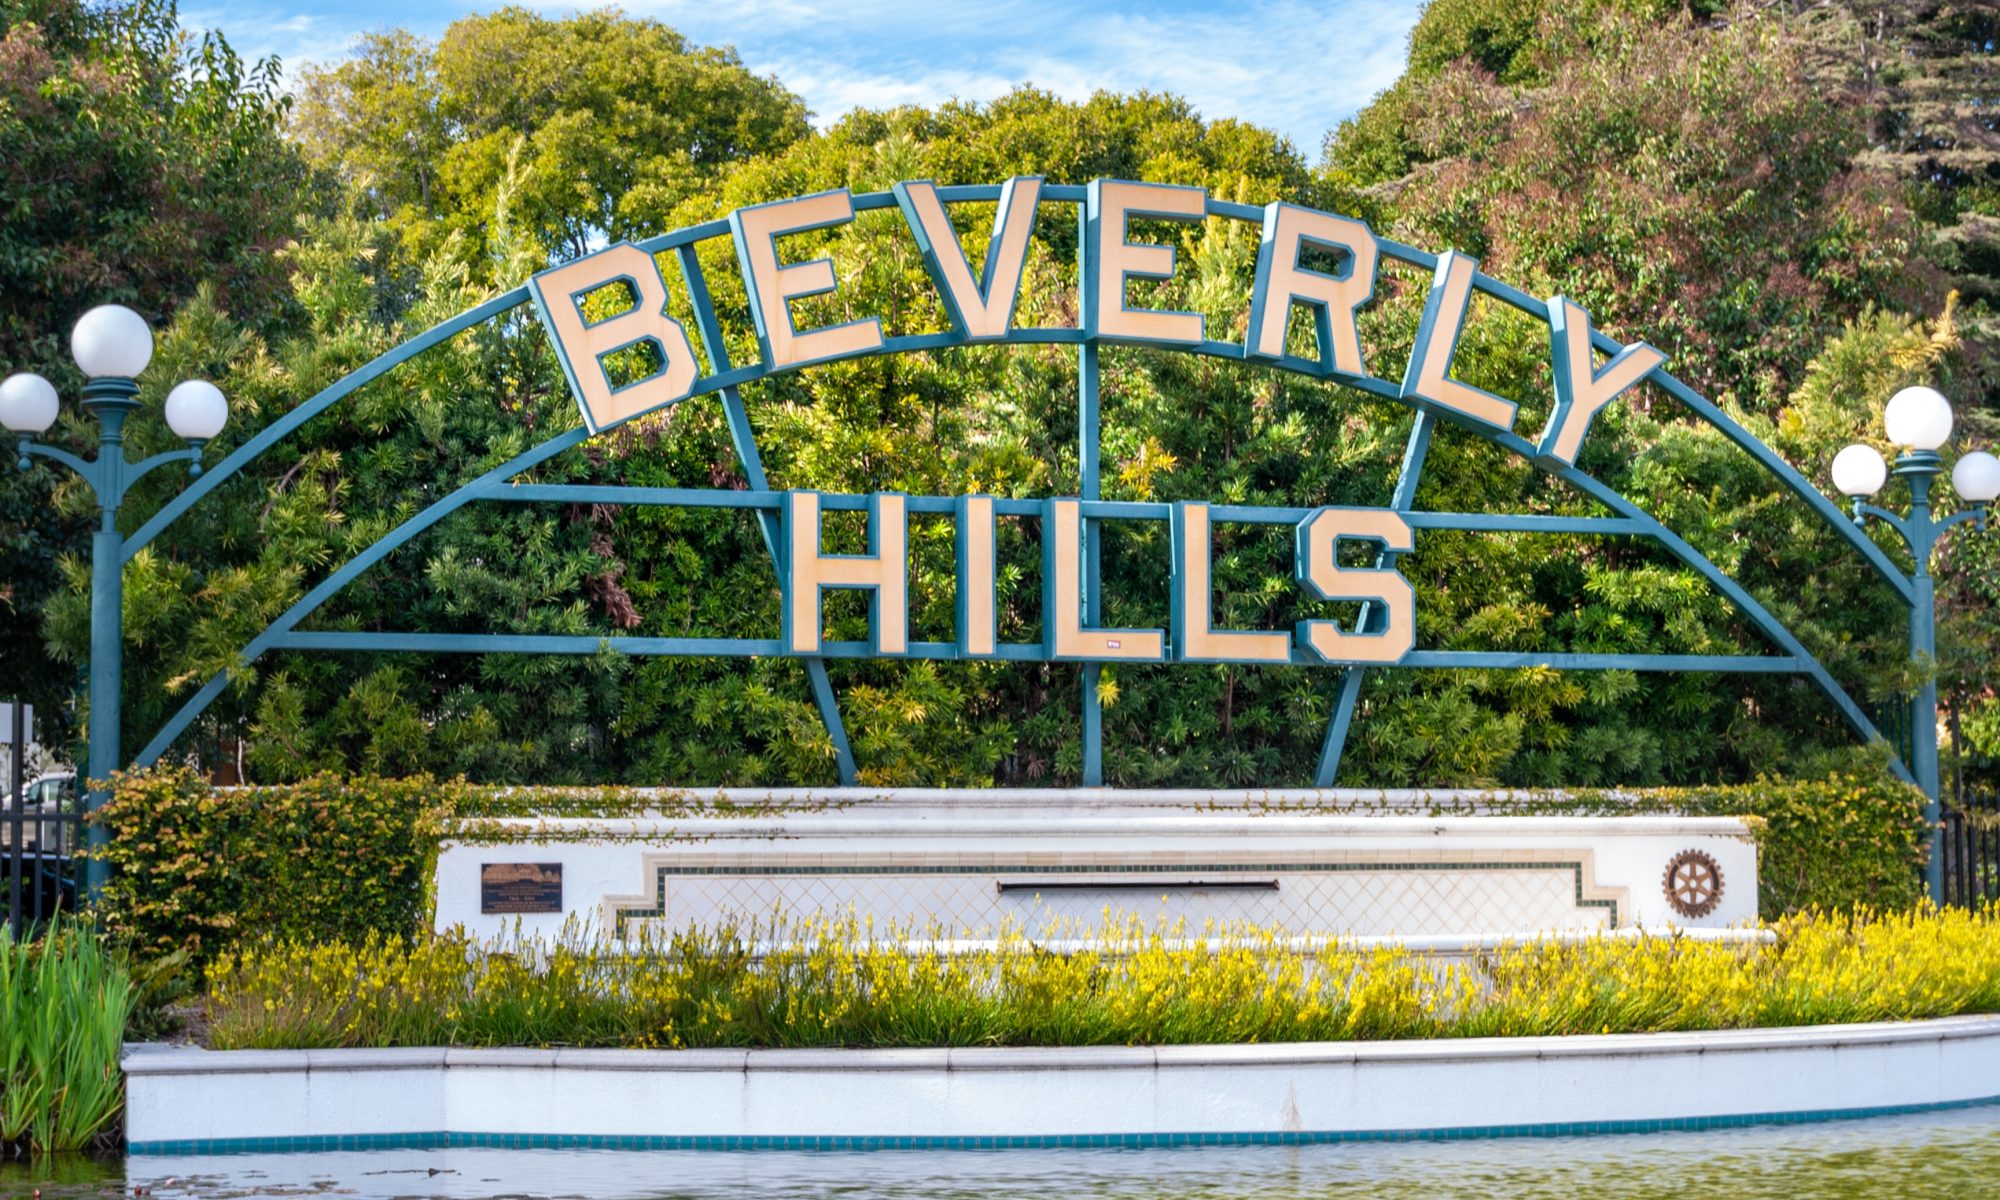 Beverly Hills where Dr. Lancer is located